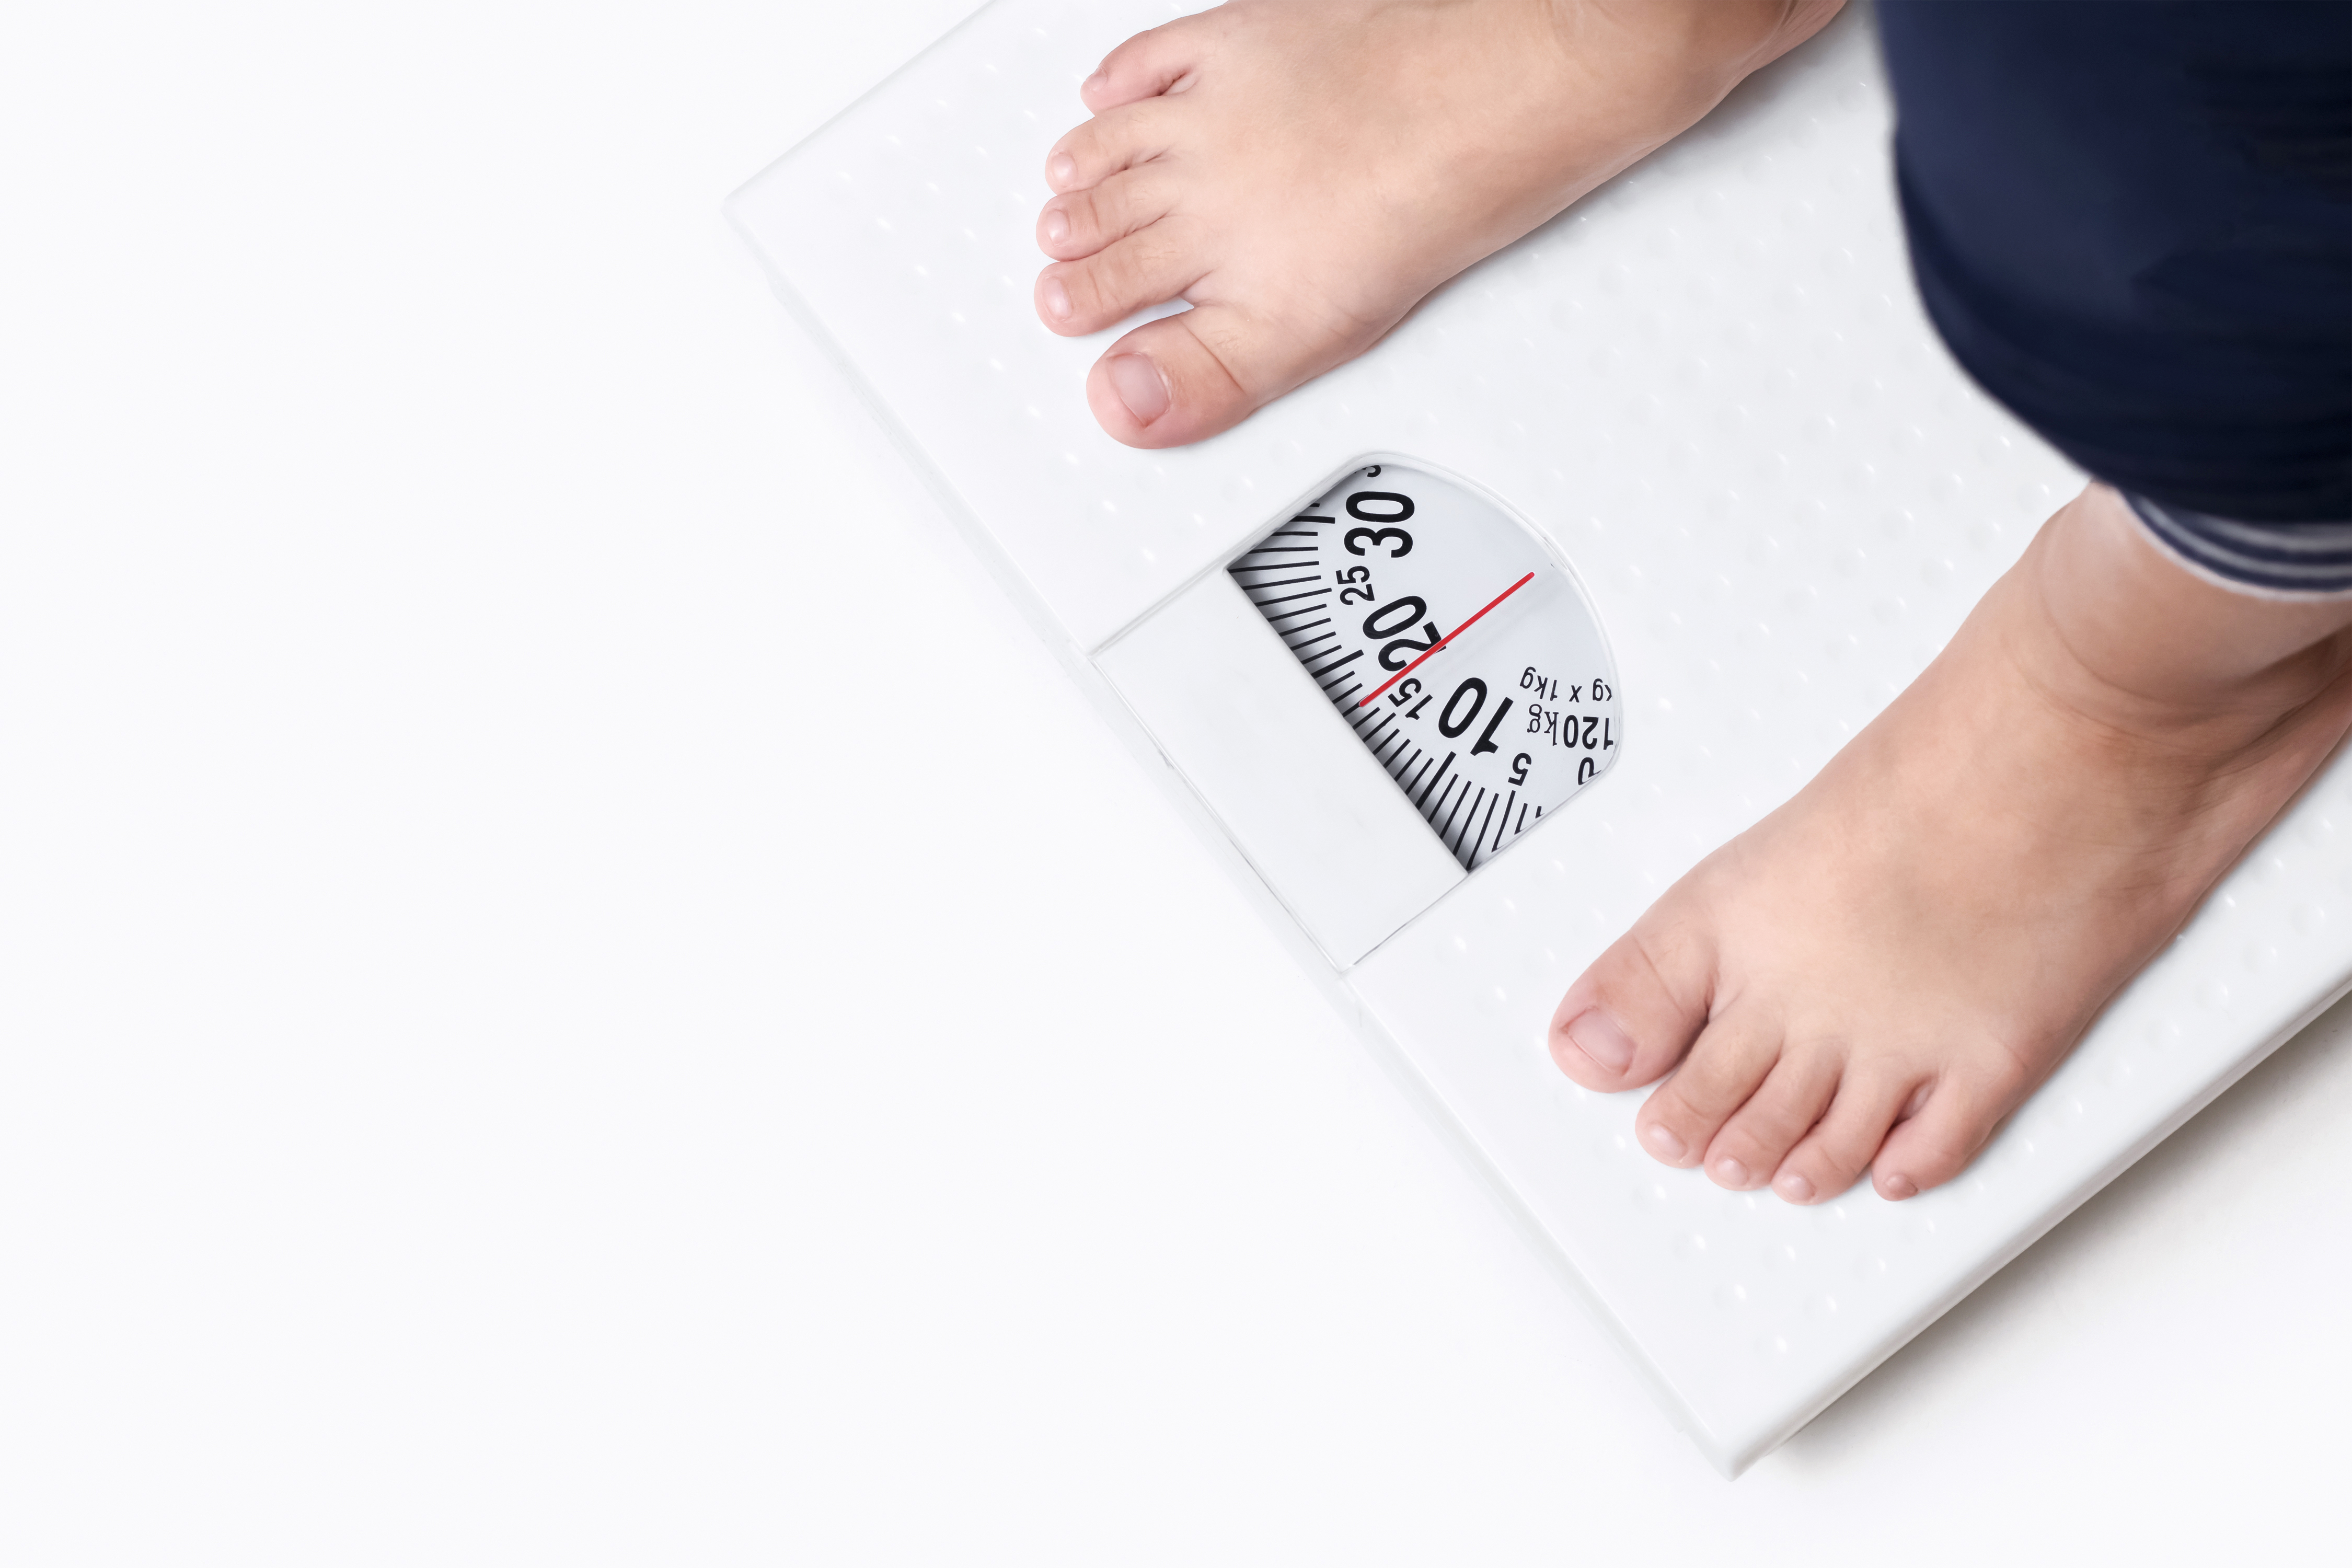 How does being overweight affect the feet?